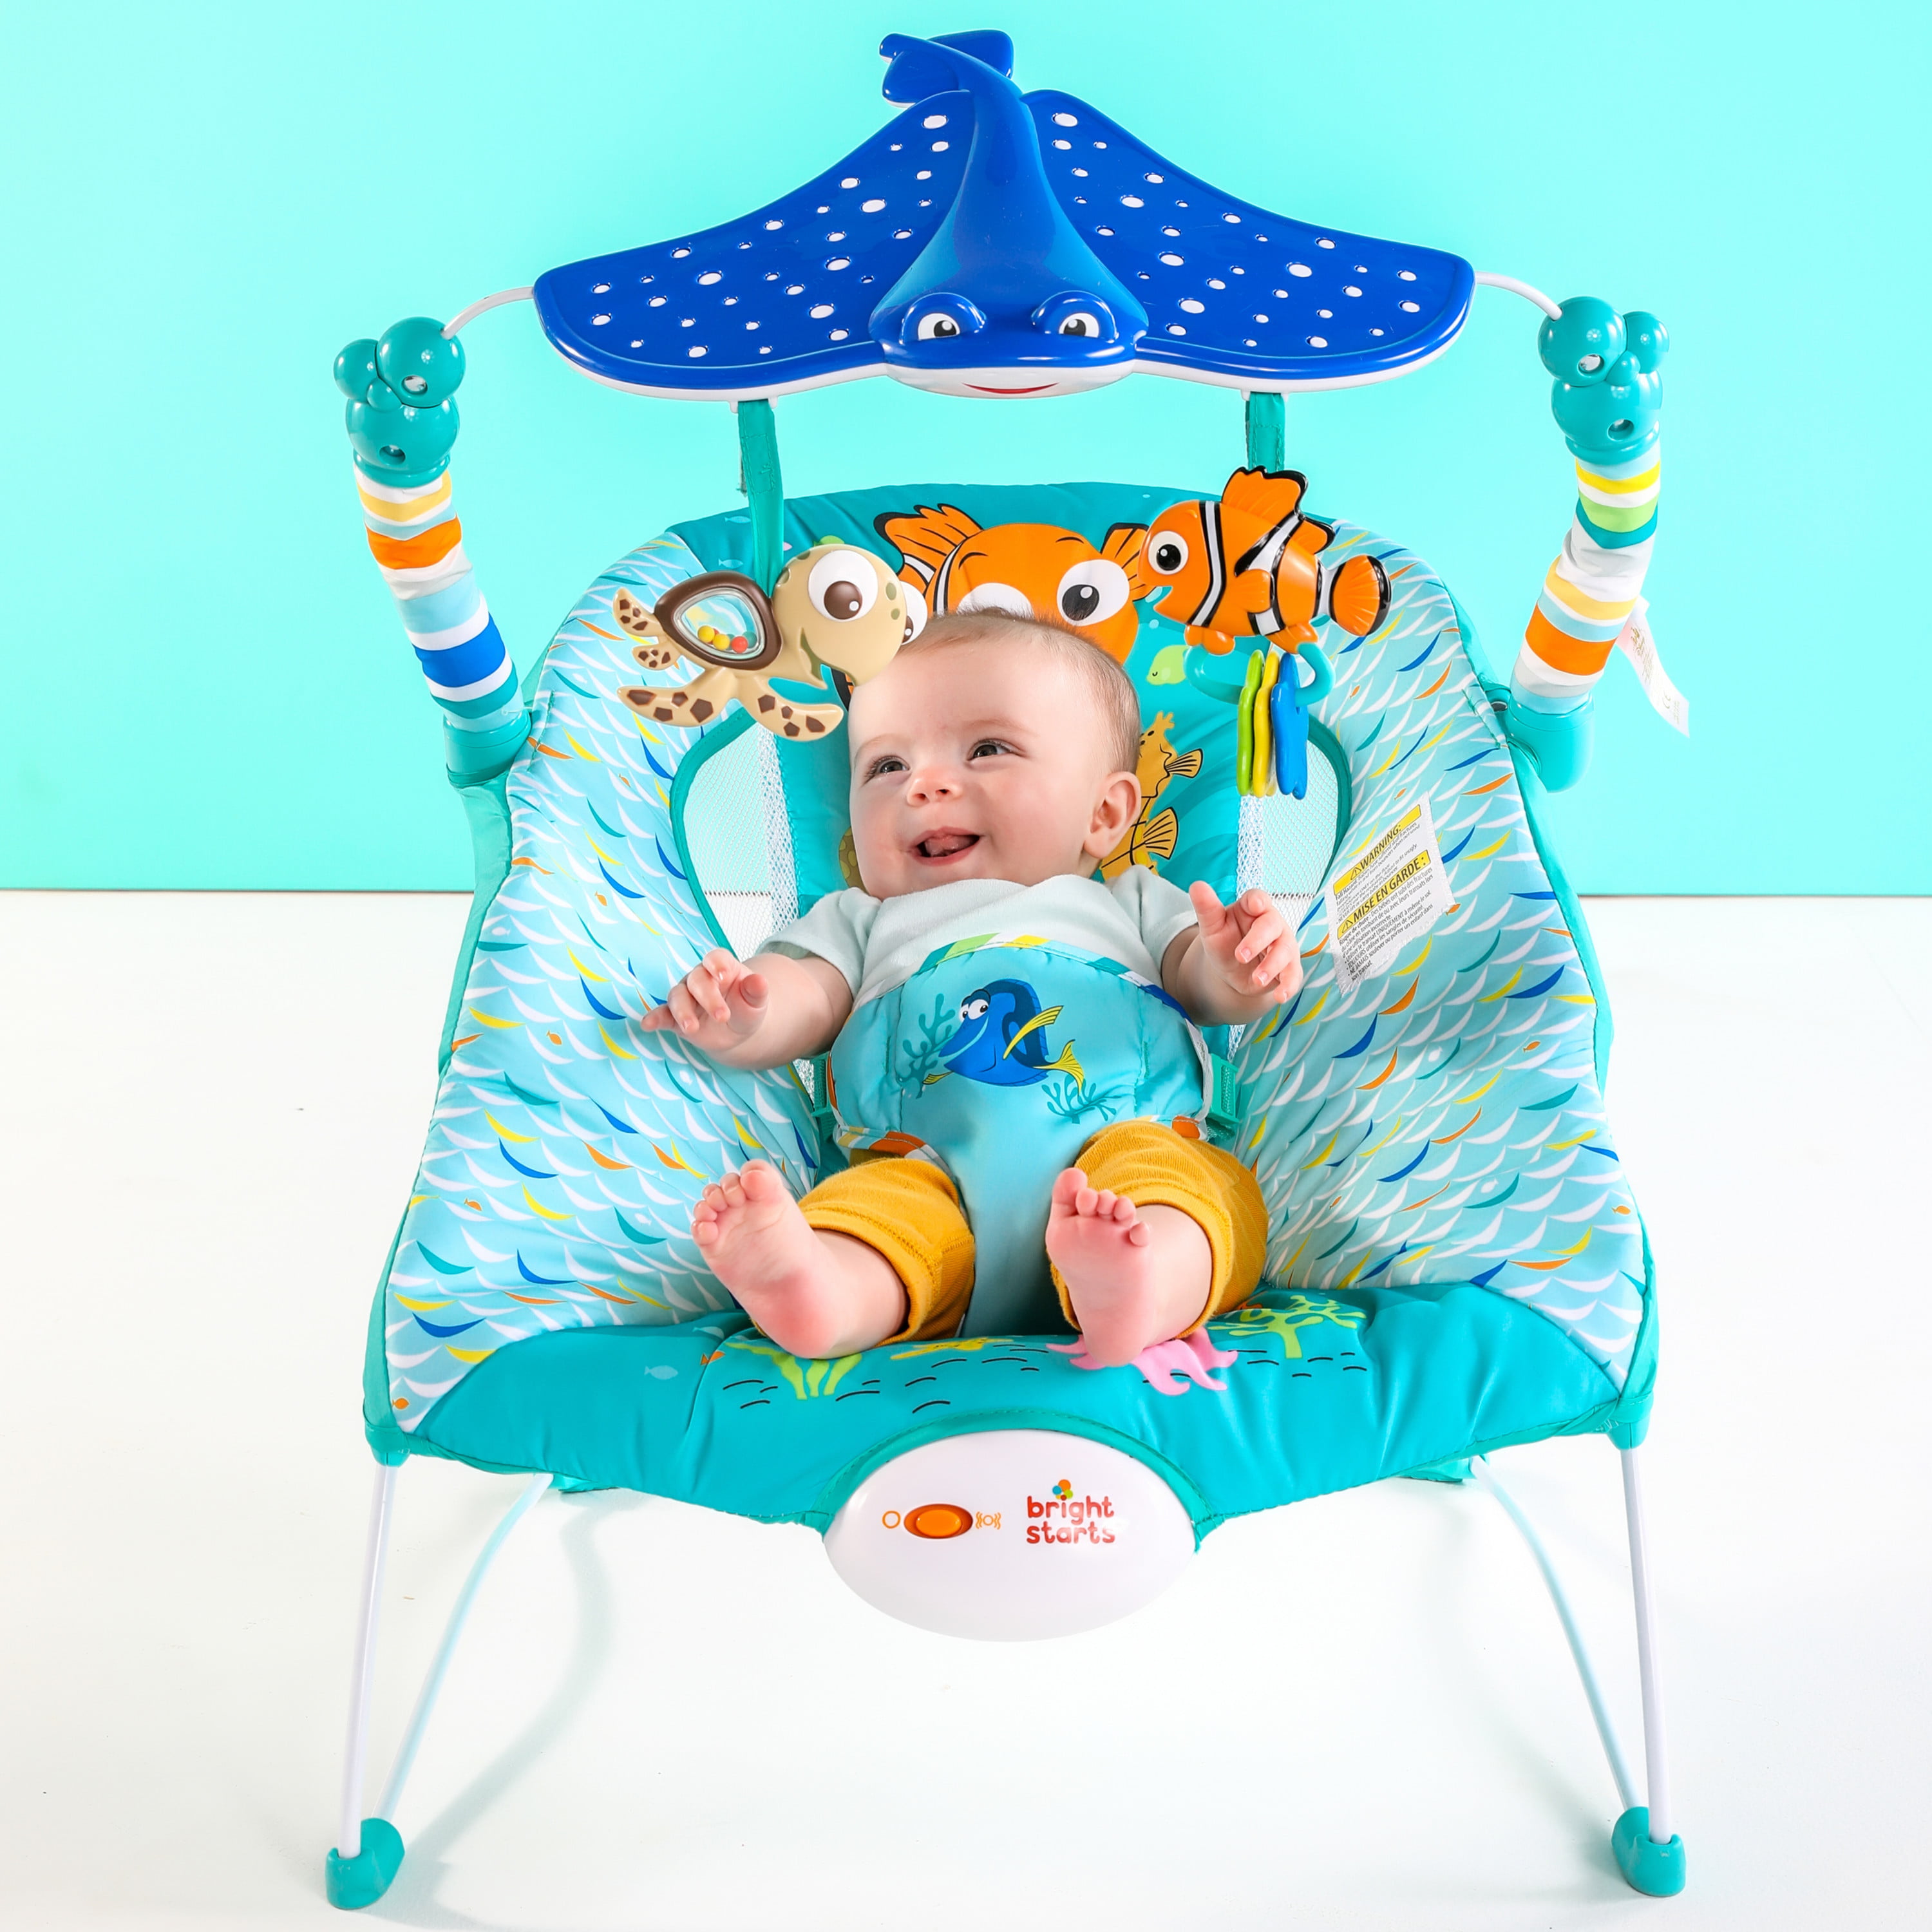 finding nemo stroller and carseat